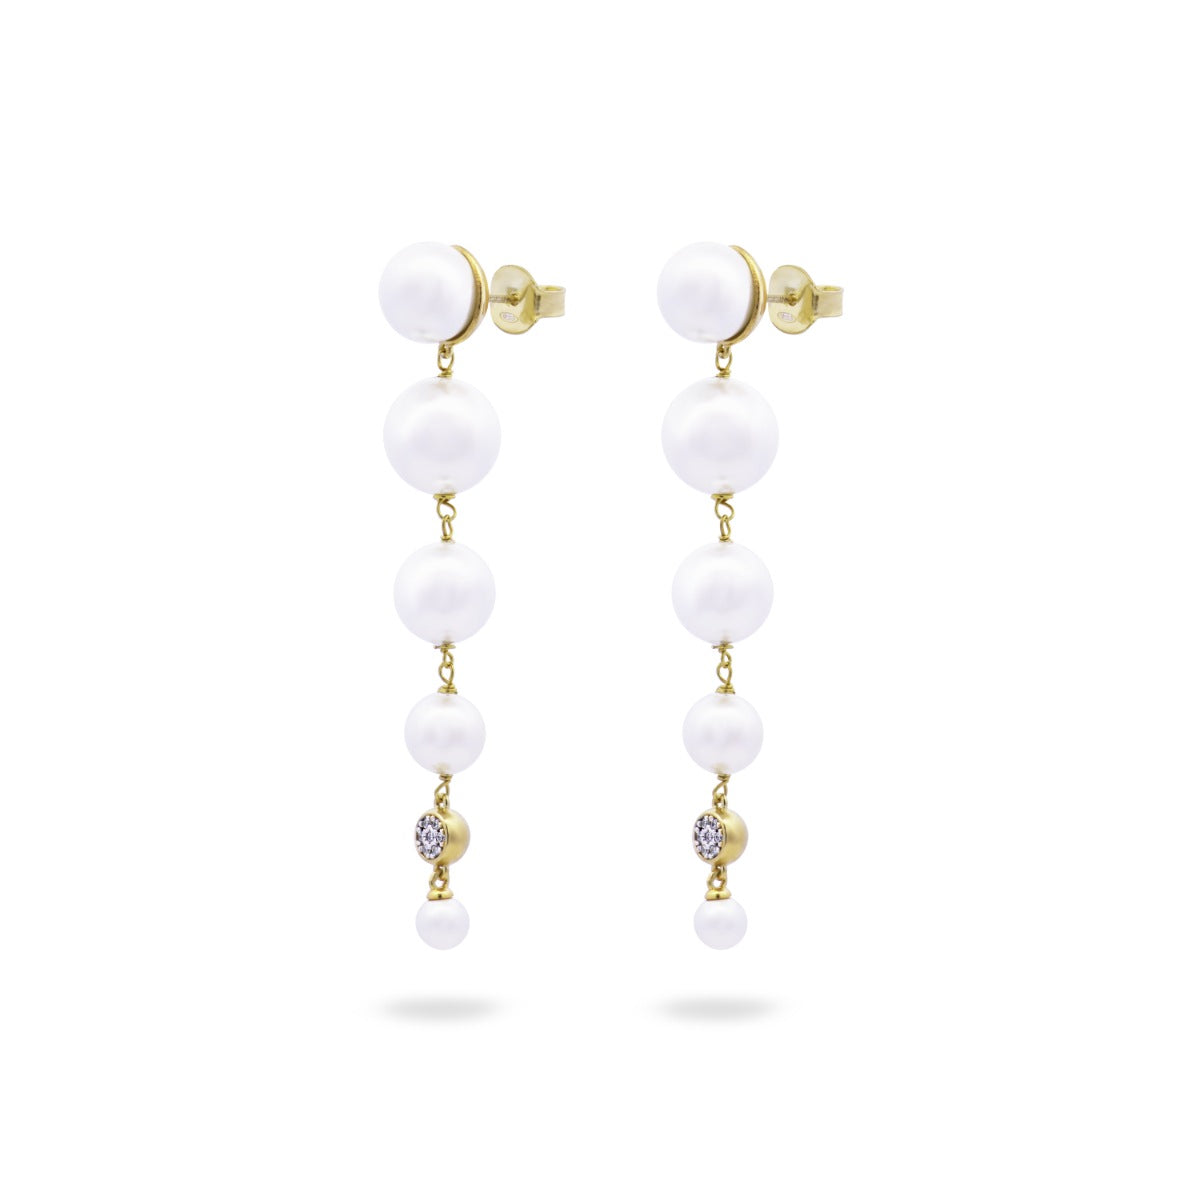 Earrings - Pair of earrings with a cascade of pearl - WHITESIDE - 1 | Rue des Mille